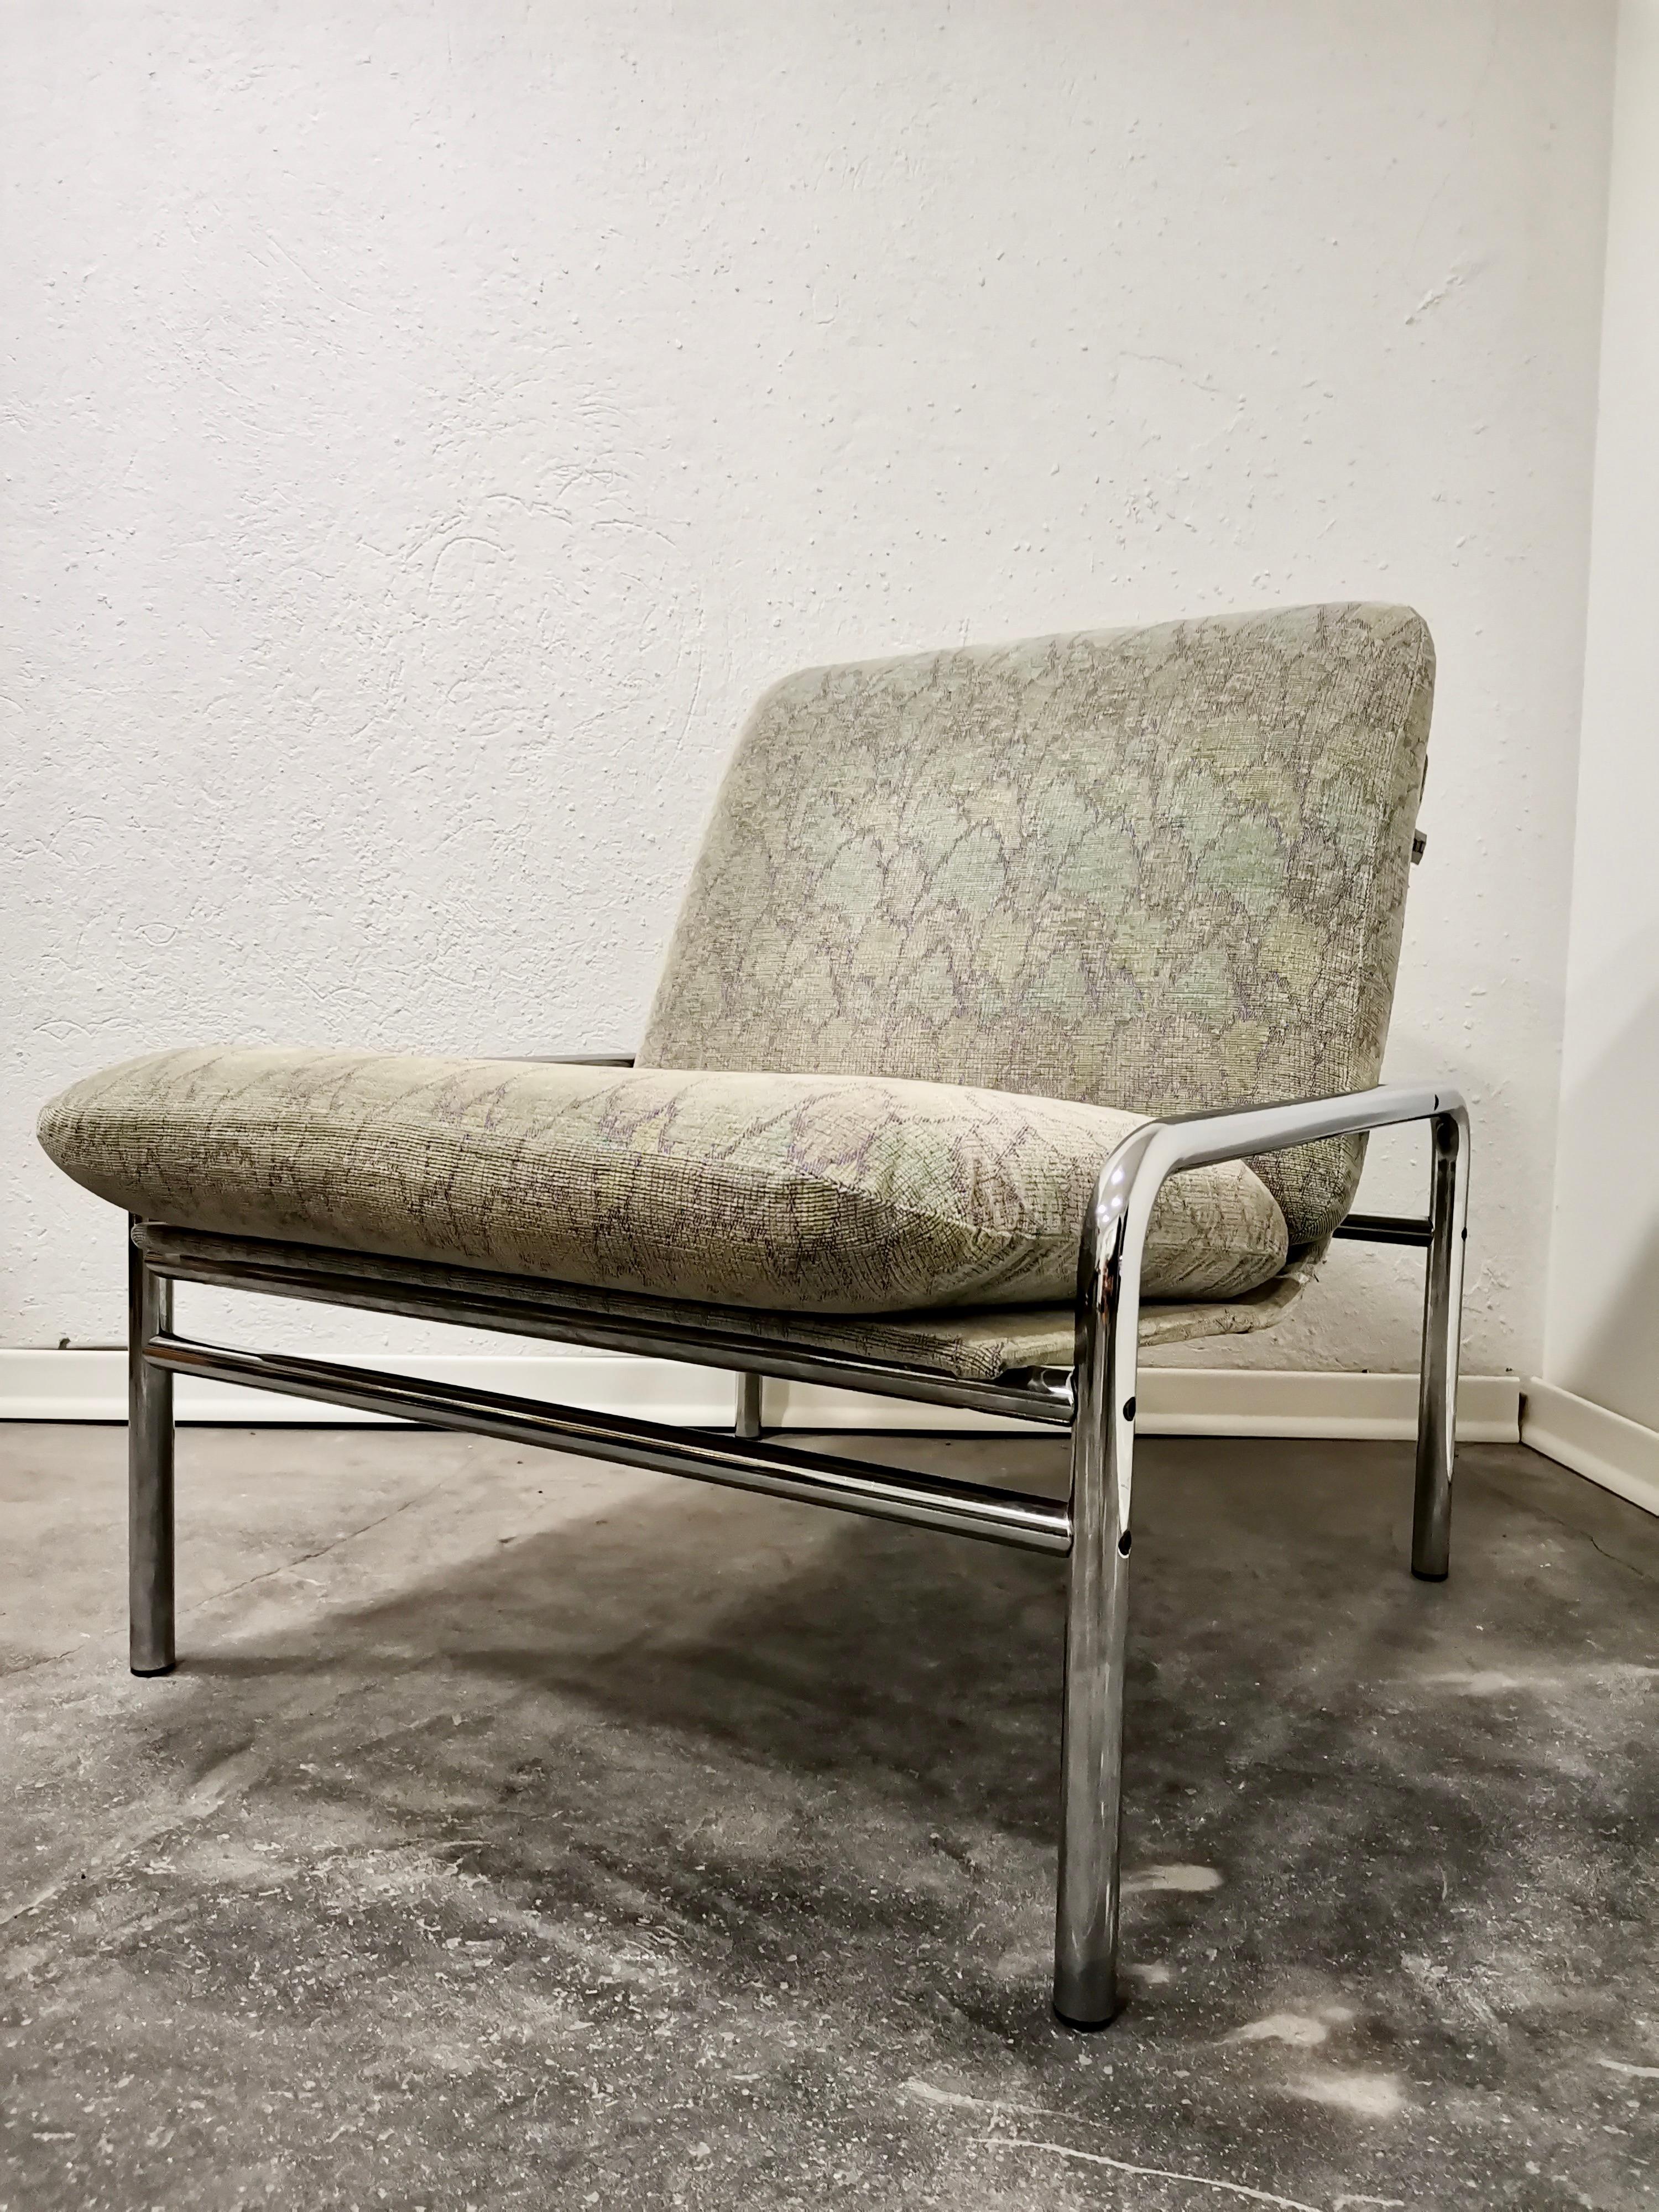 Very rare lounge chair which was produced in late 1980s by Stol Kamnik. Its modern look is still fashionable with reminiscence of Bauhaus period. It is beautiful and very comfortable. It can be paired with any style of vintage furniture.  A touch of